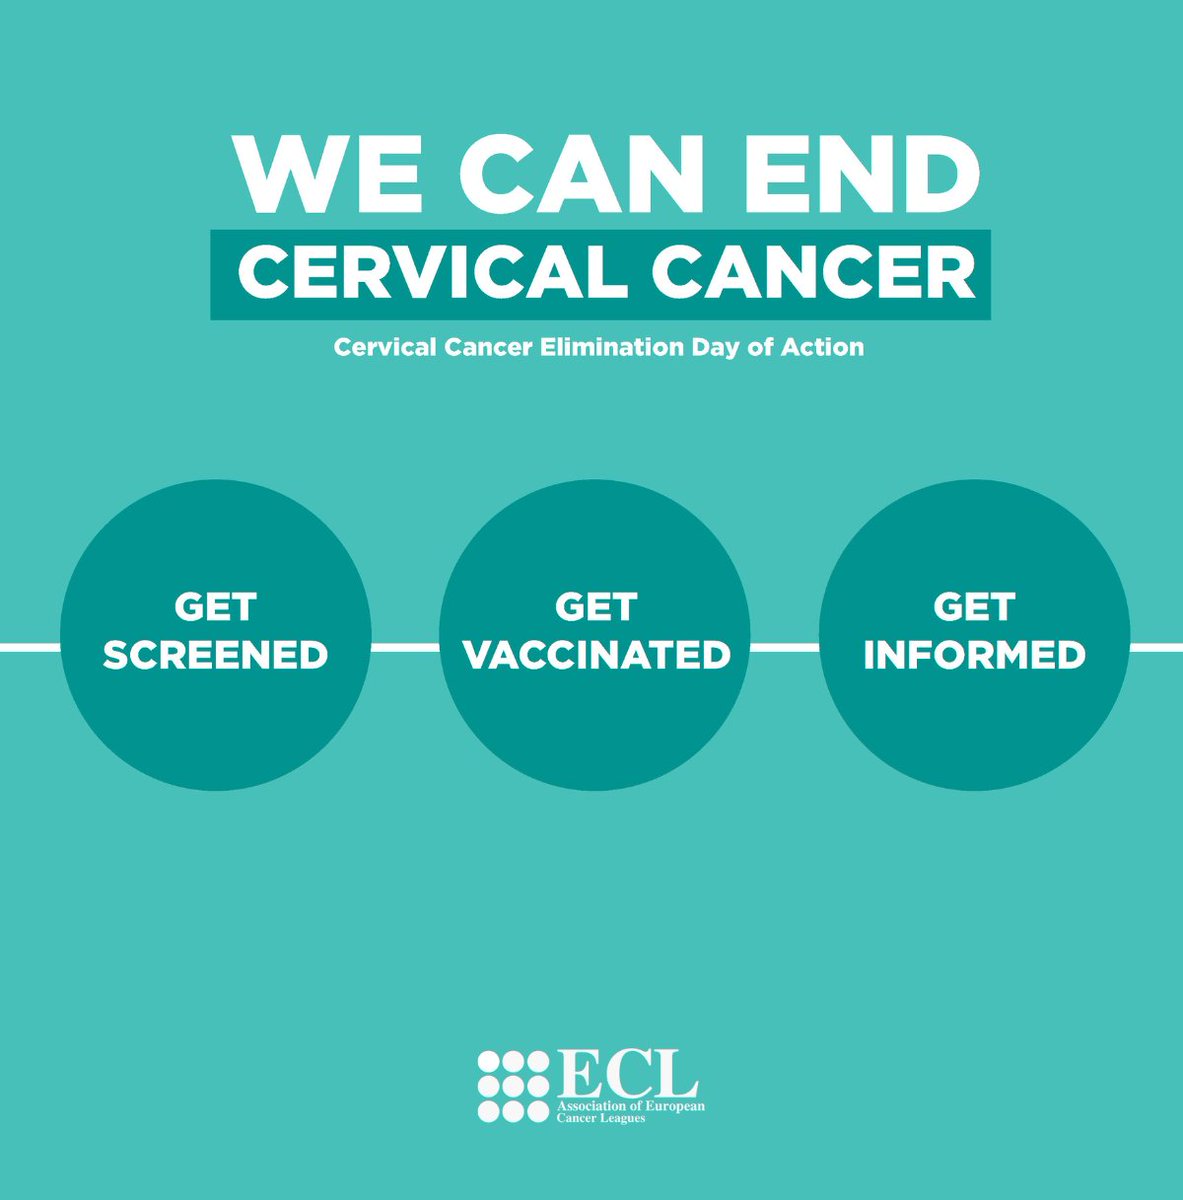 This week marks three years of the global commitment to #EndCervicalCancer. Get Screened➡️Get Vaccinated➡️Get Informed Learn more: bit.ly/466Leg5 #CervicalCancer #CervicalCancerElimination